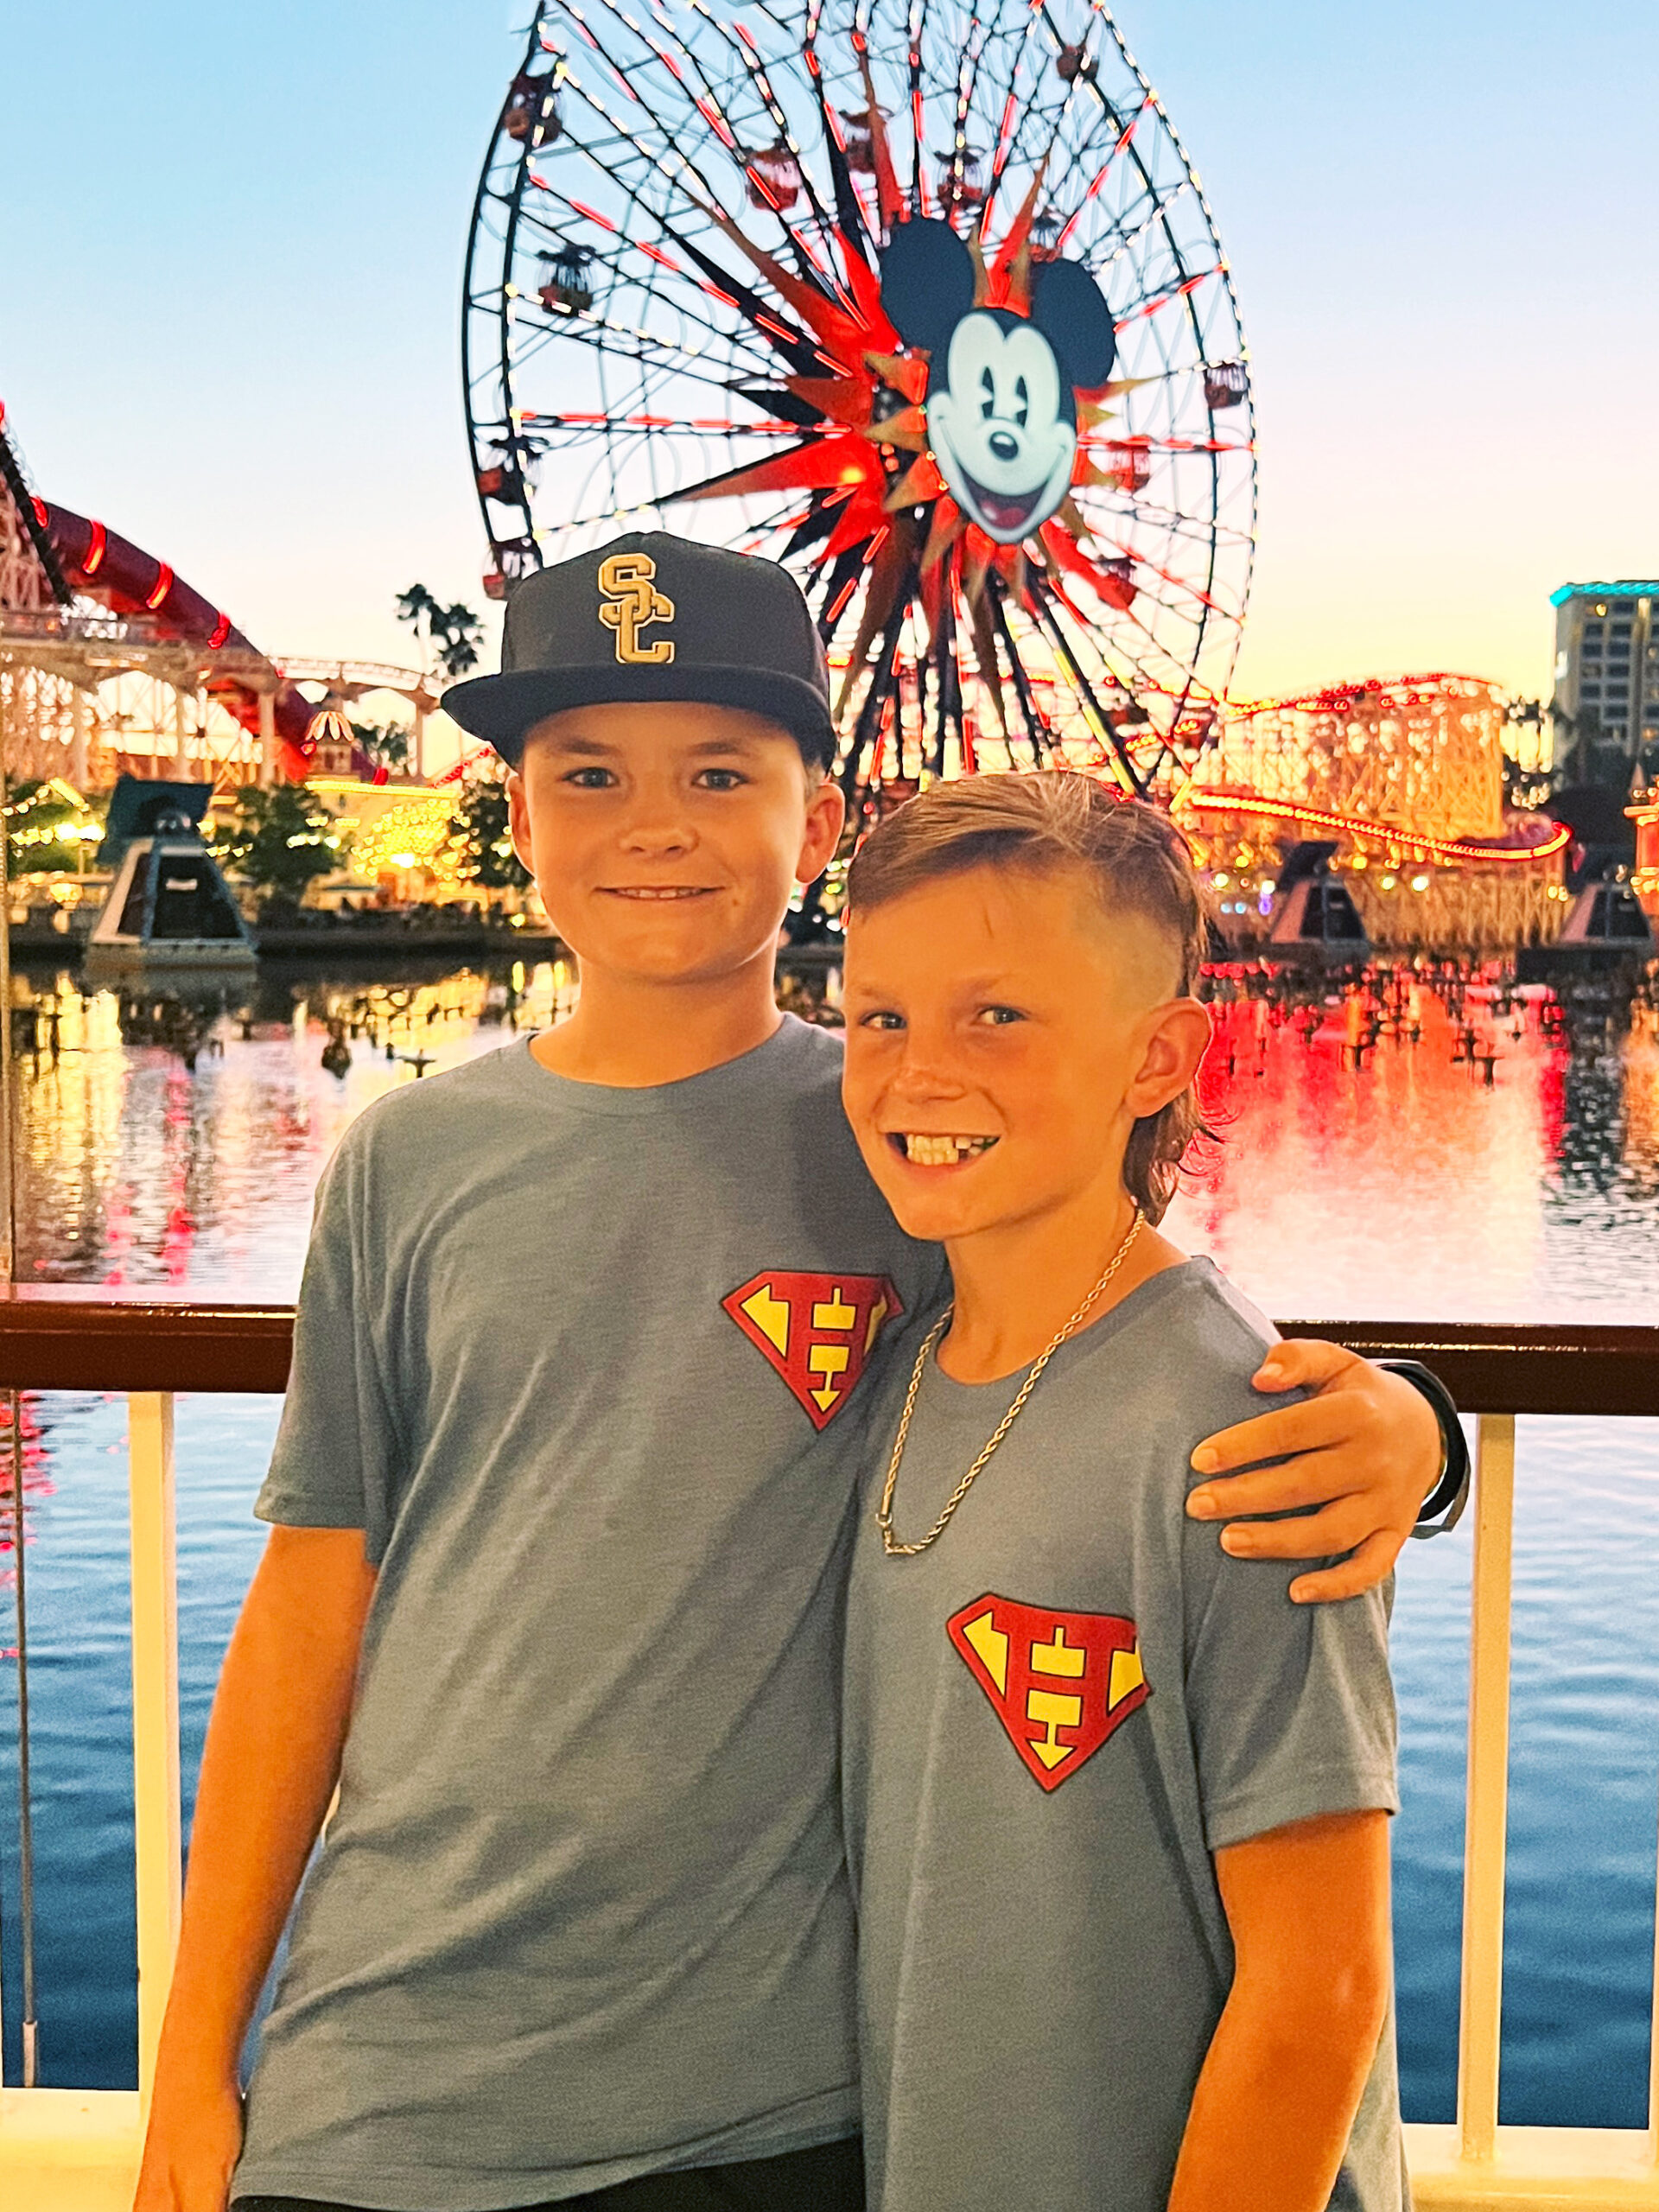 Hudson and Cole smiling together at Disney California Adventure.